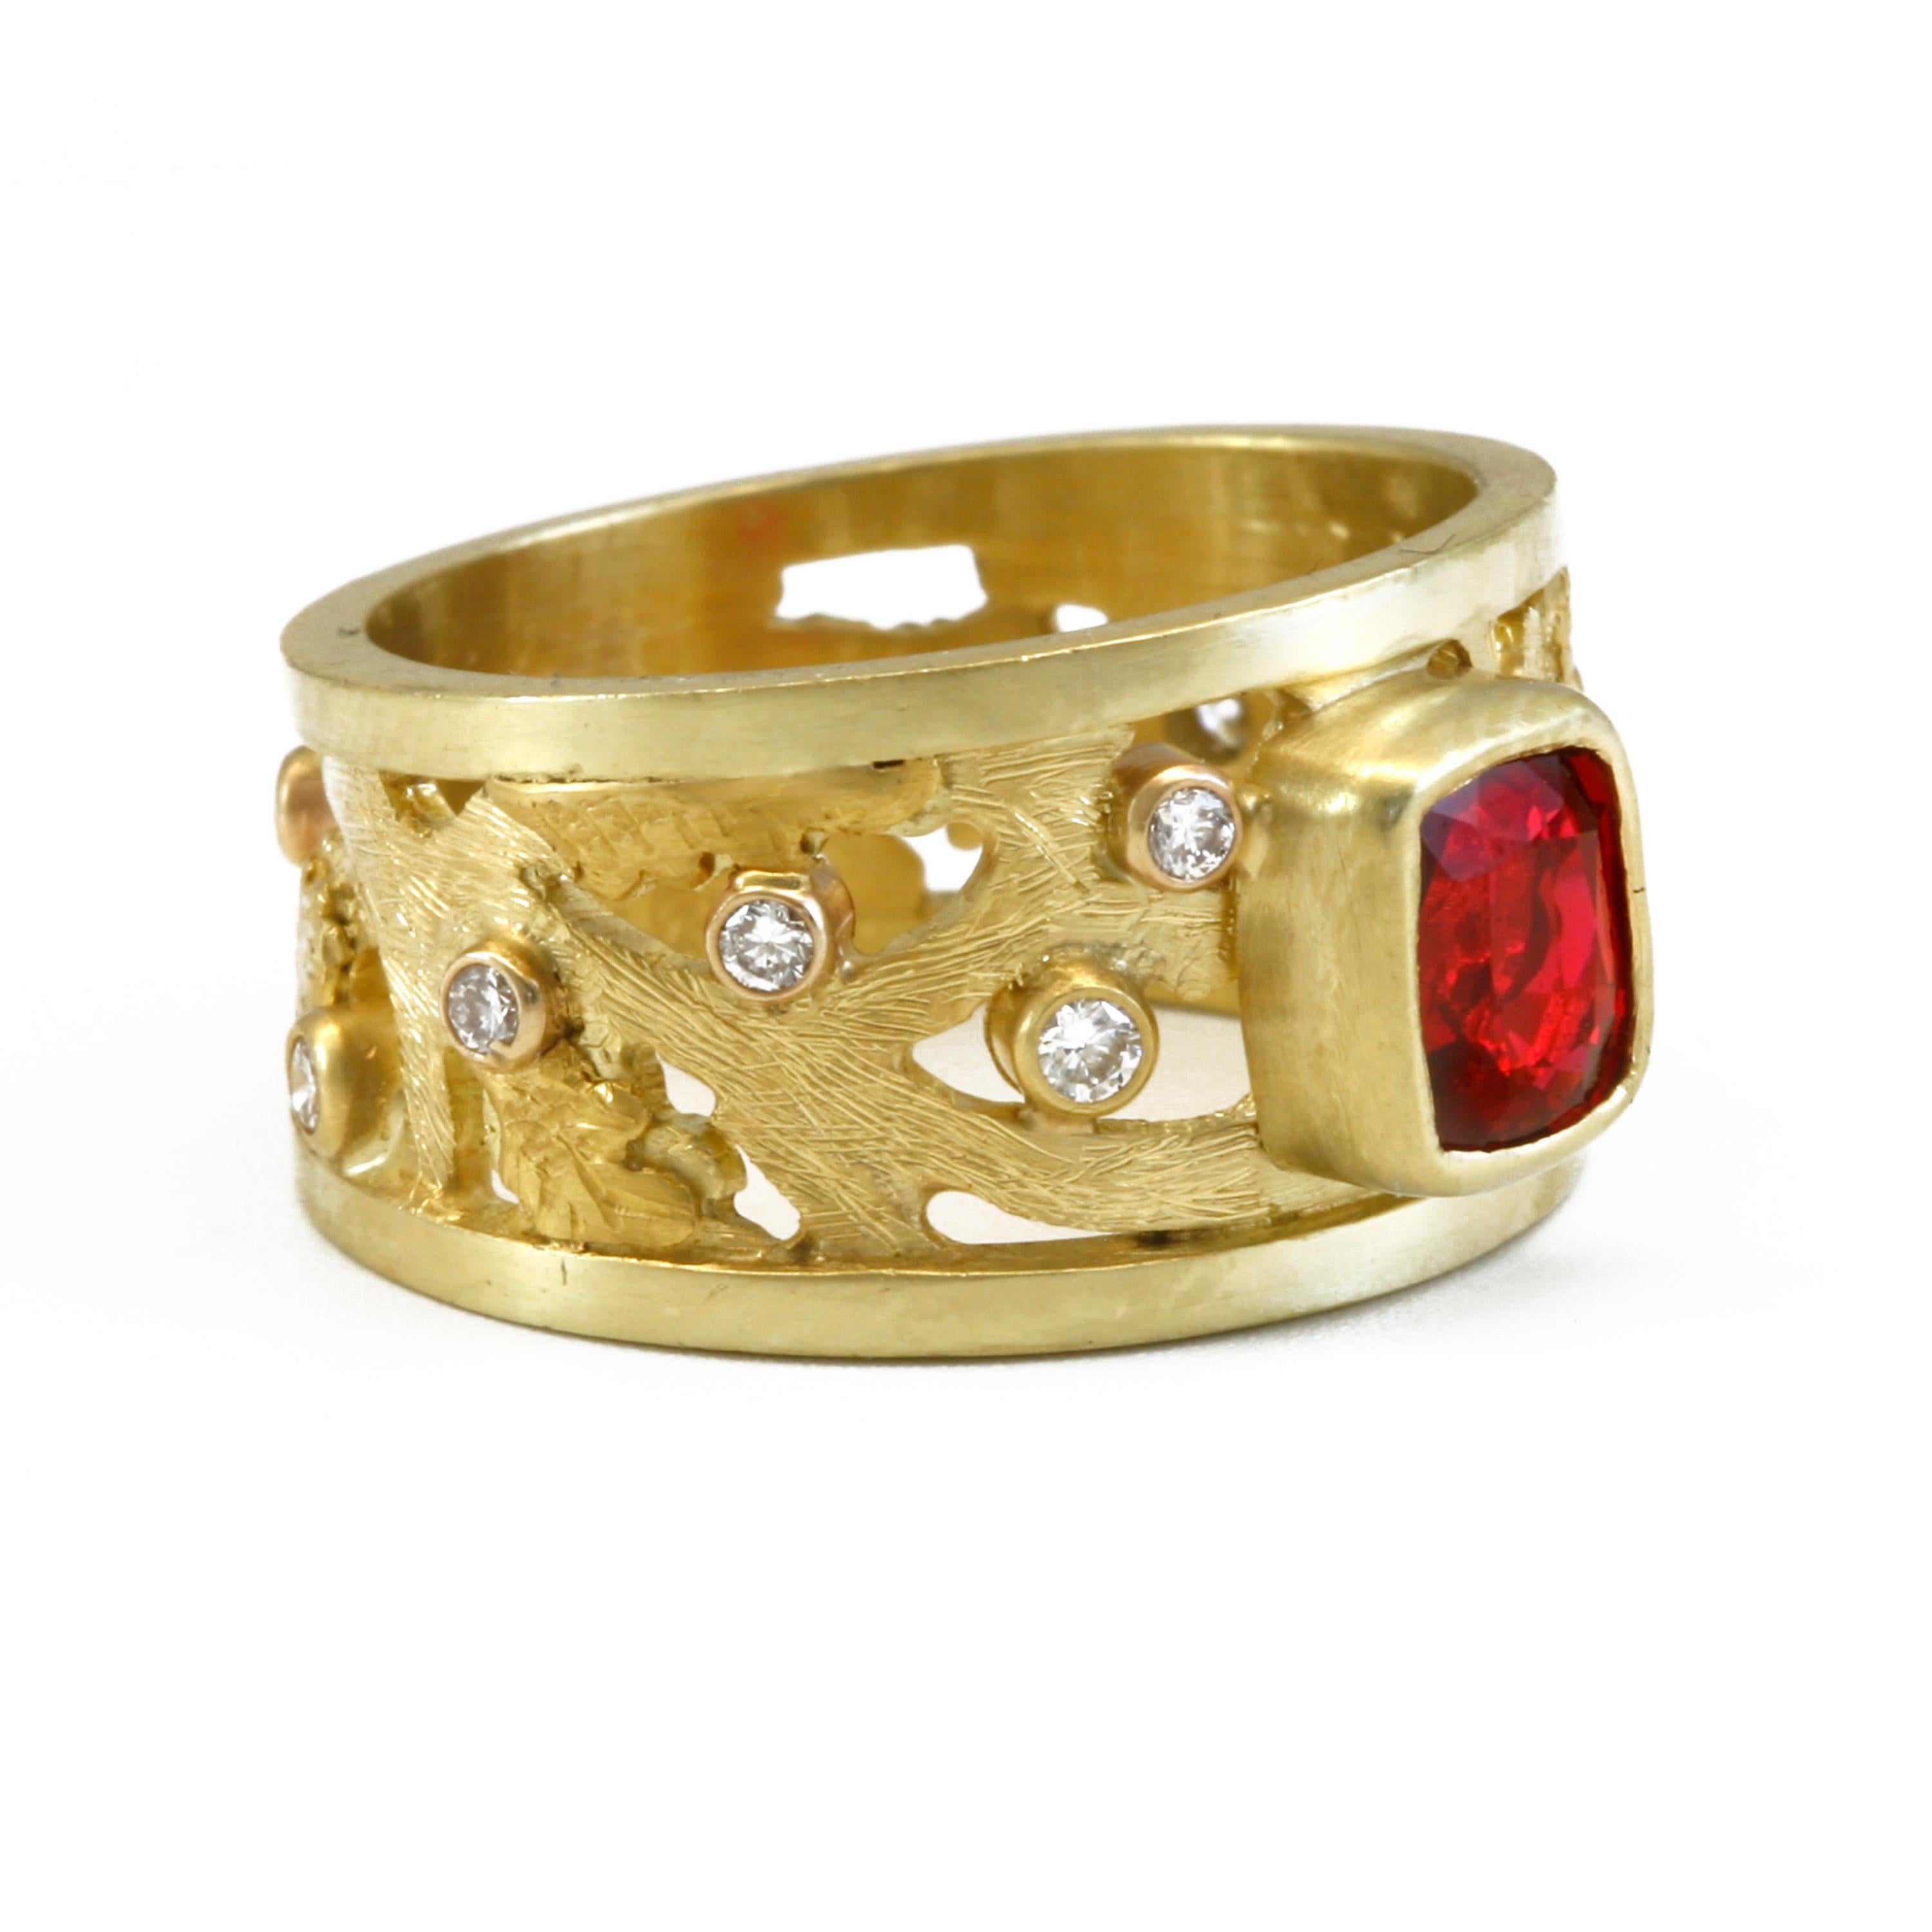 1.25 Carat Red Spinel with .27 Carat Diamonds Set in 18k Gold Scrollwork Band For Sale 1